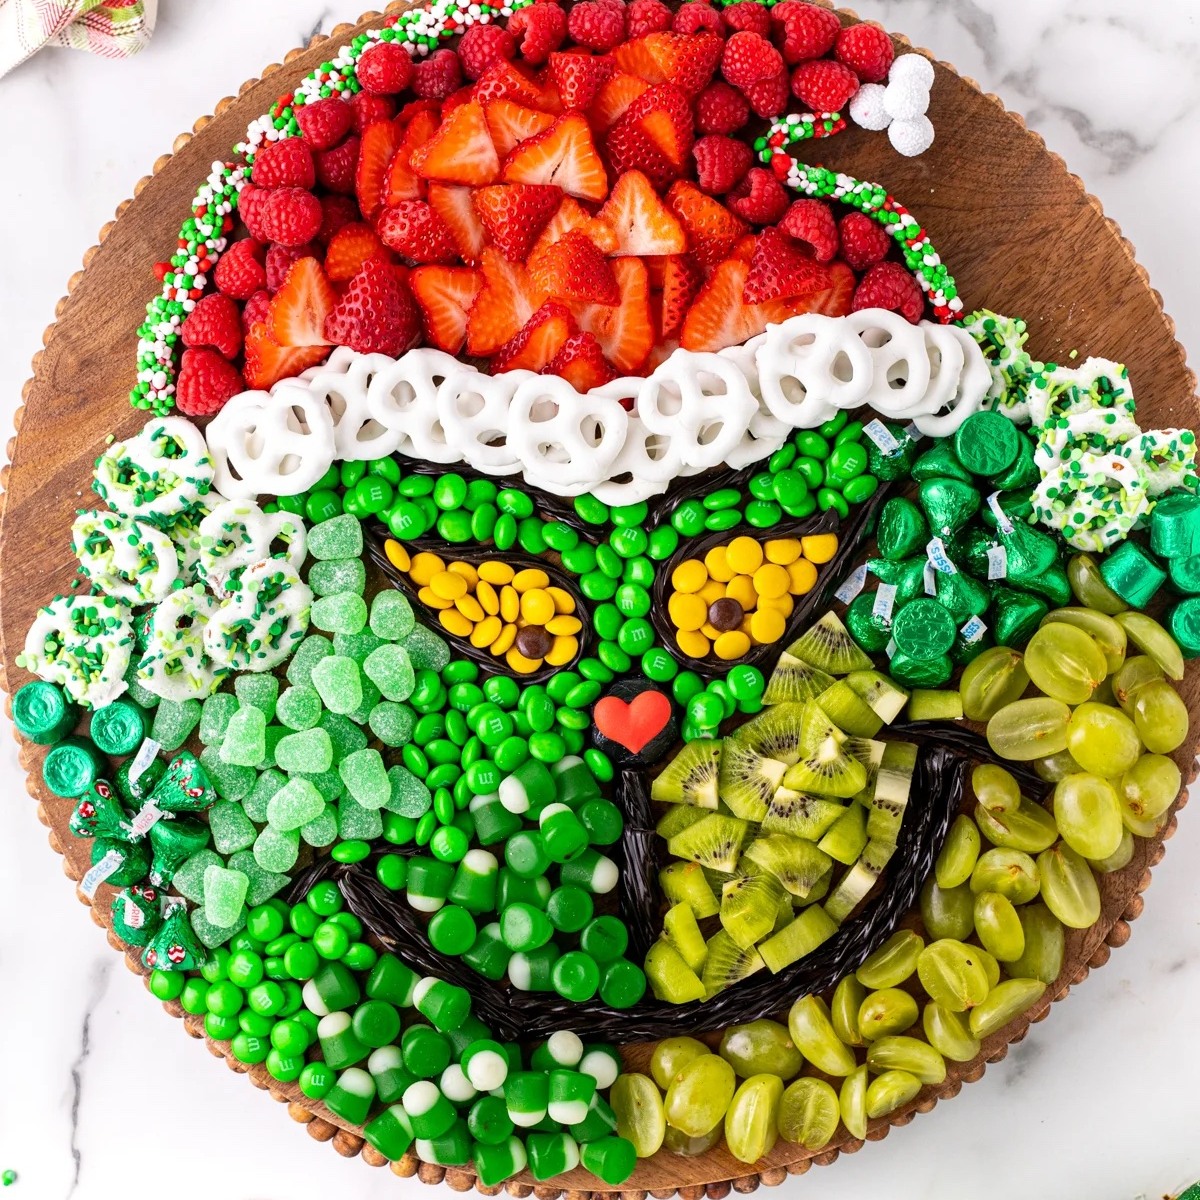 Get Ready To Be The Talk Of The Party When You Bring This Board To Your Grinchmas Celebrations. If It Weren't Filled With So Many Delicious Treats You Might Feel Naughty Eating It